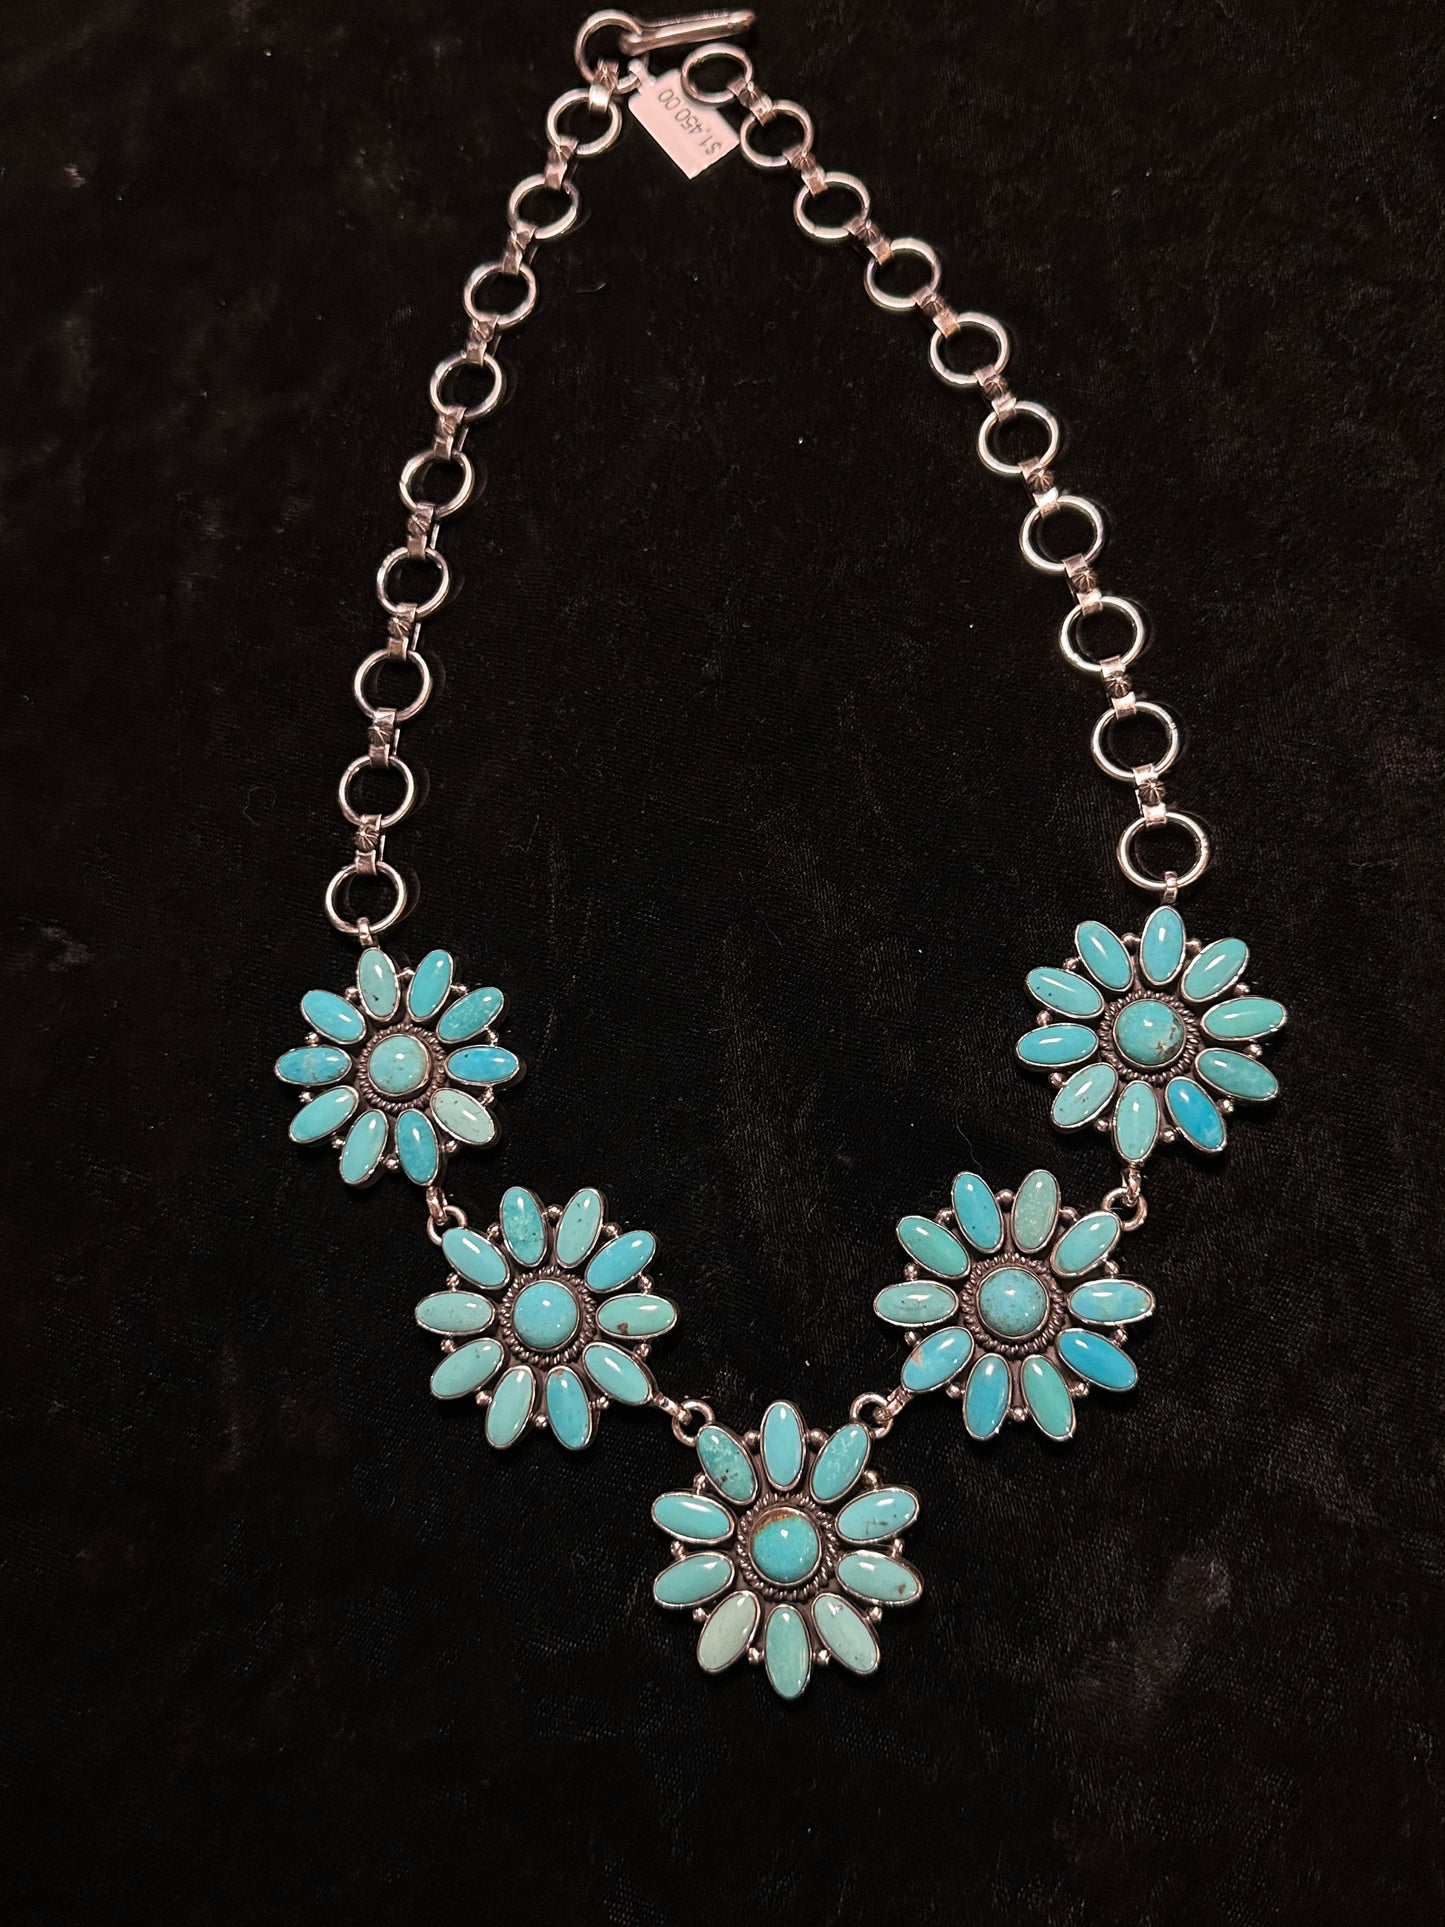 24” Sleeping Beauty Turquoise Flower Necklace by Zia